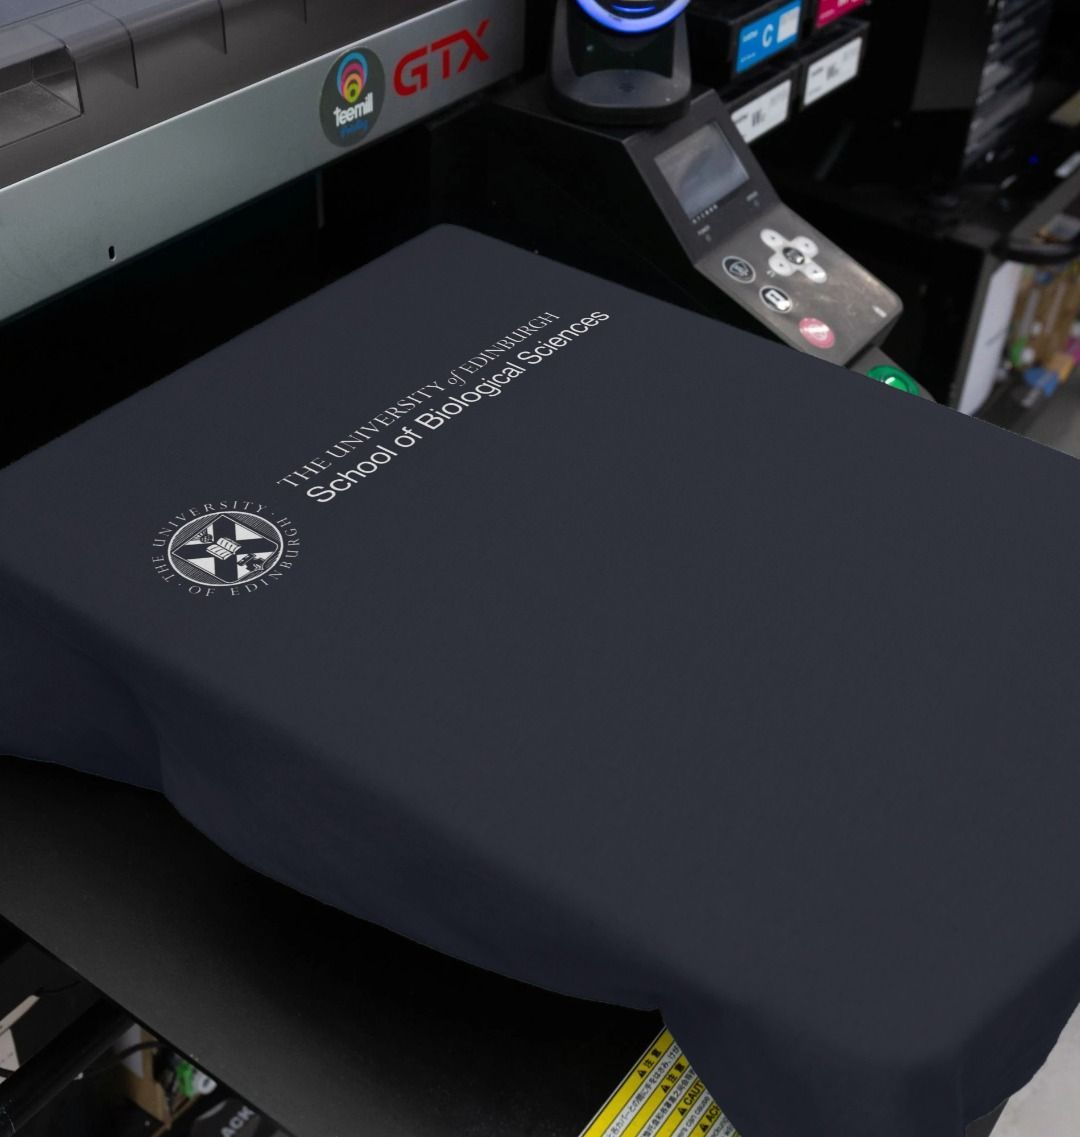 Our School of Biological Sciences T Shirt being printed by our print on demand partner, teemill